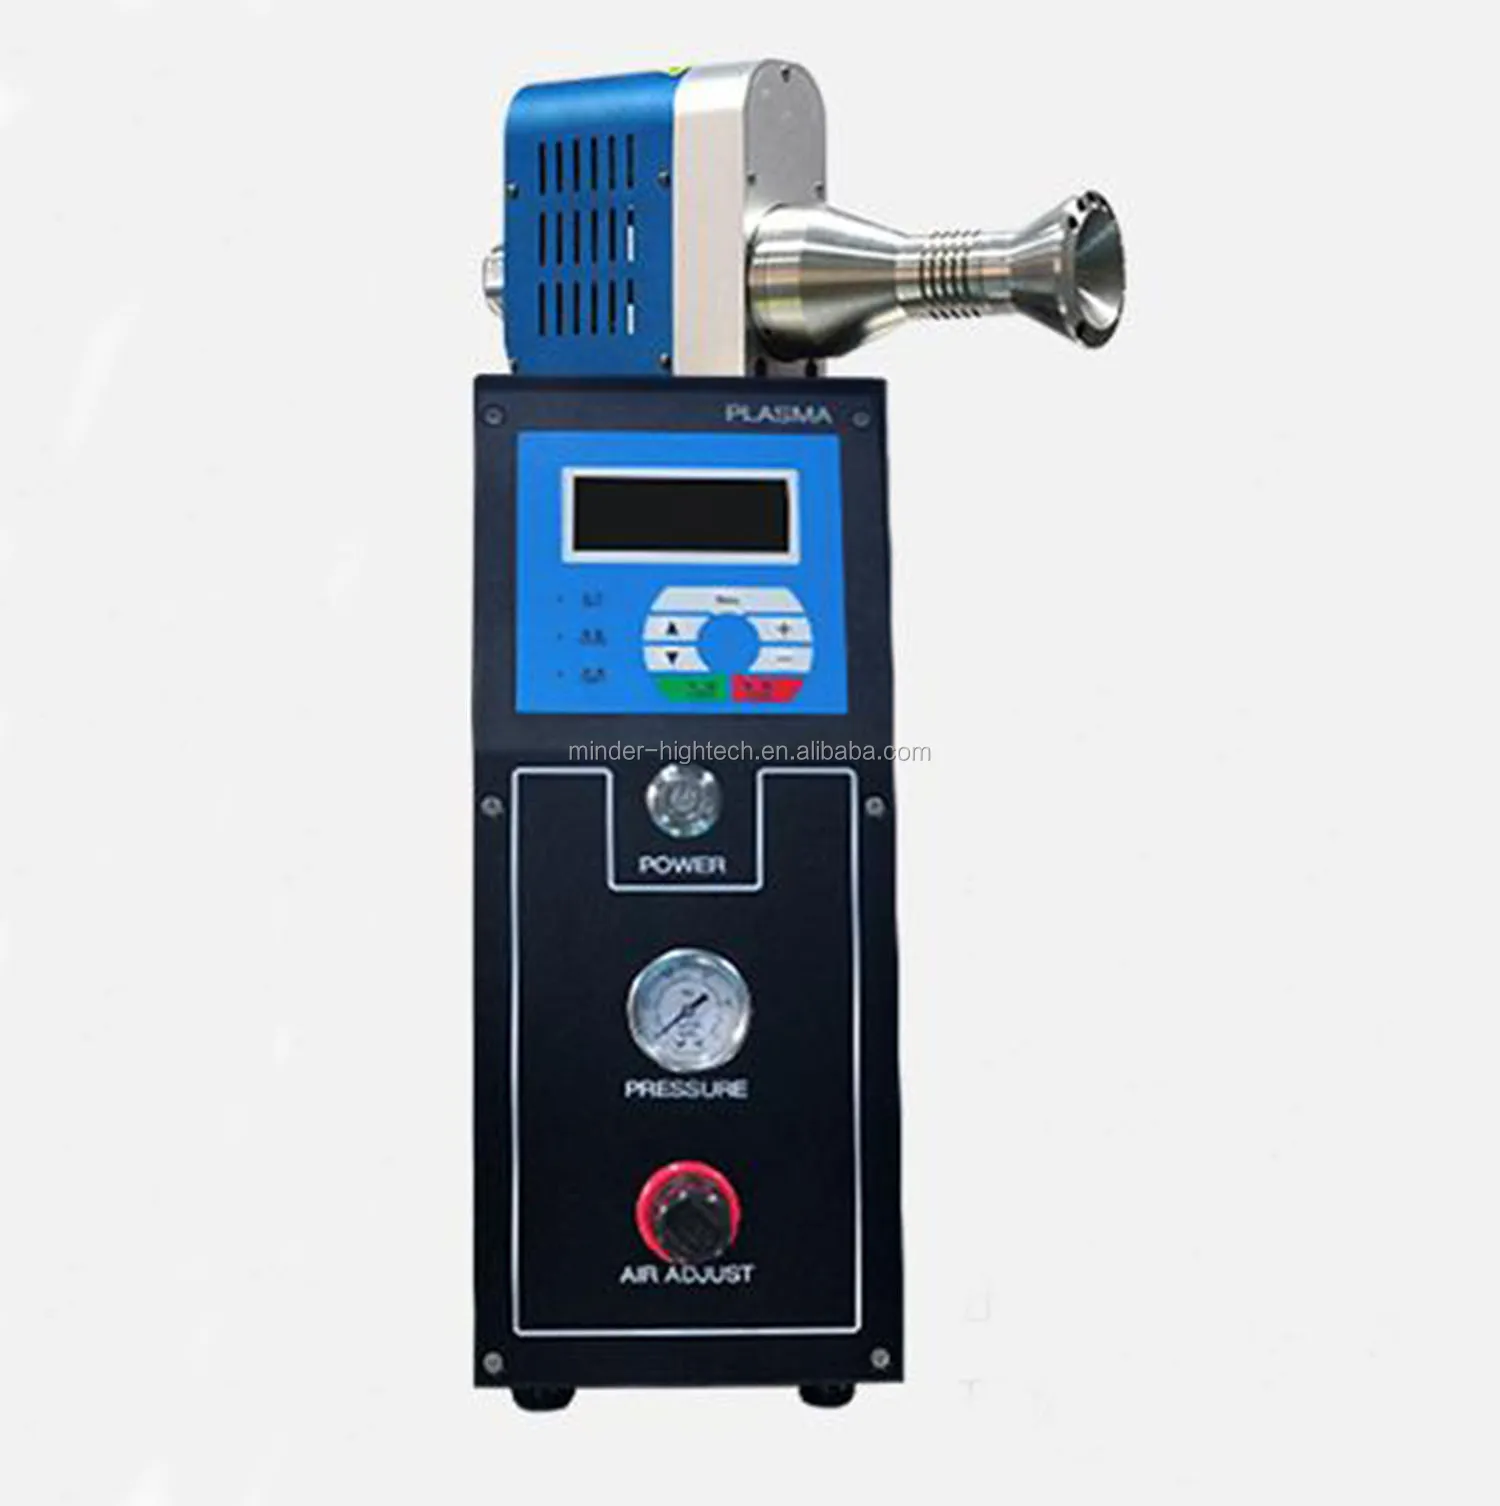 Atmospheric plasma cleaning machine cleaner for glass with plasma gun for glass ,cellphone screen ,PP,PE,PVC